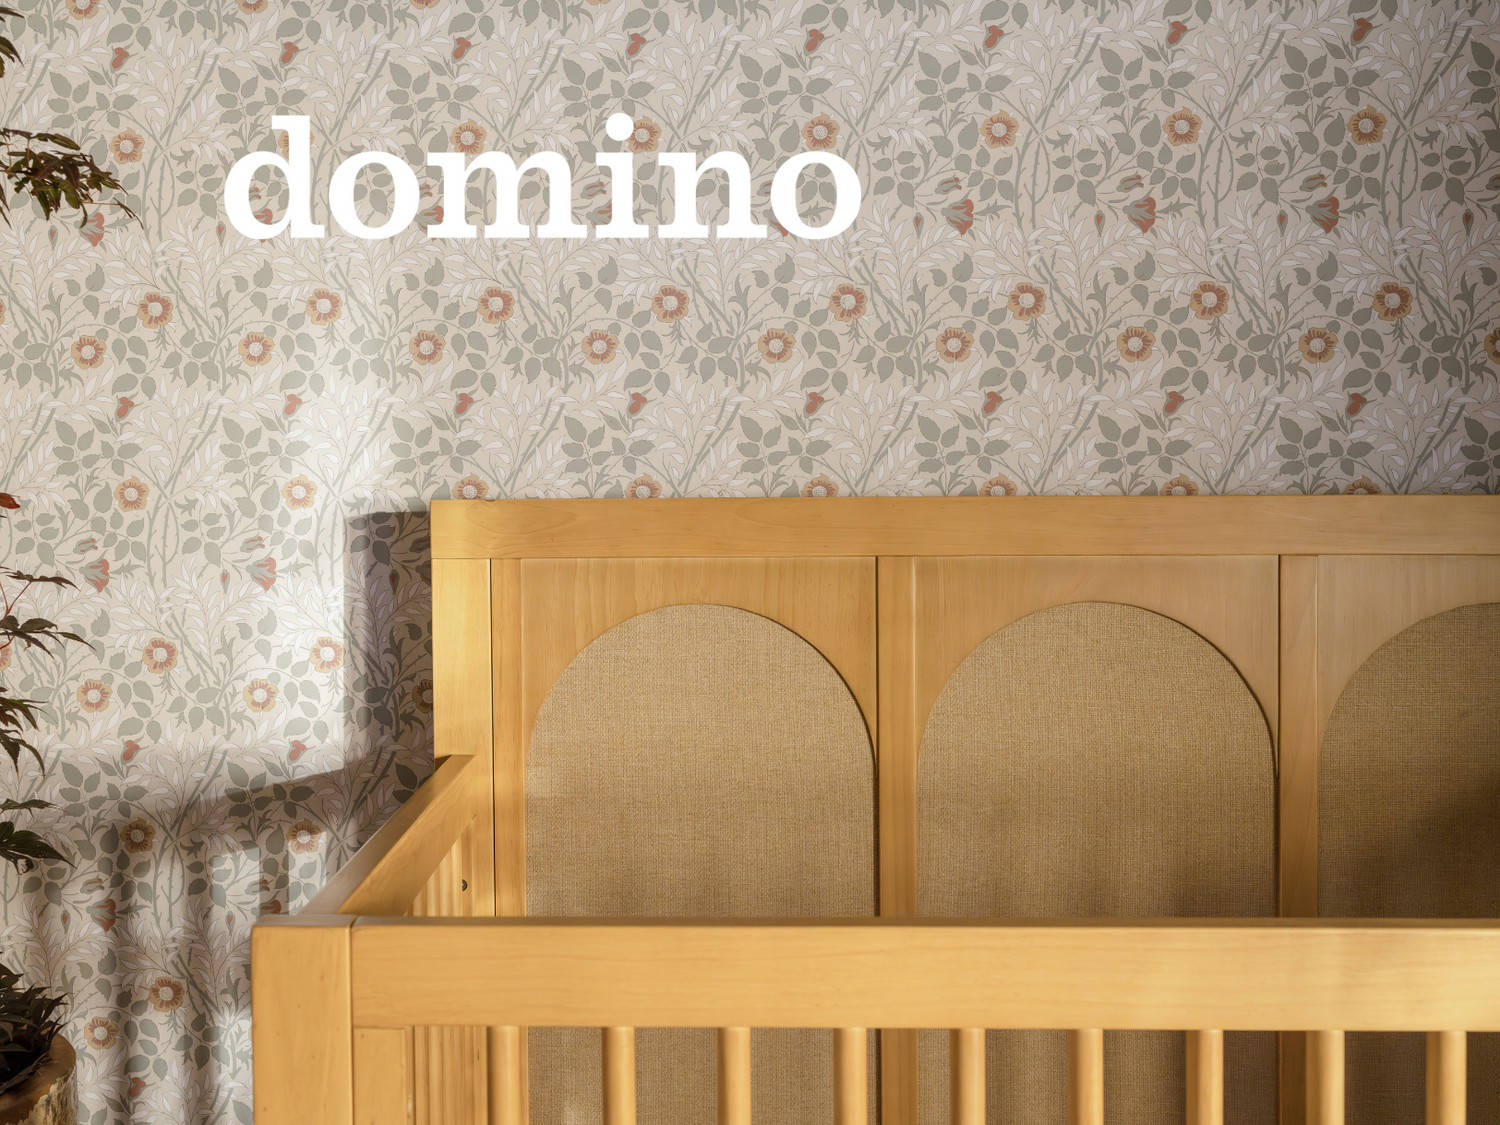 Domino: We Found the Stylish Convertible Crib That New Parents Will Love for Years to Come